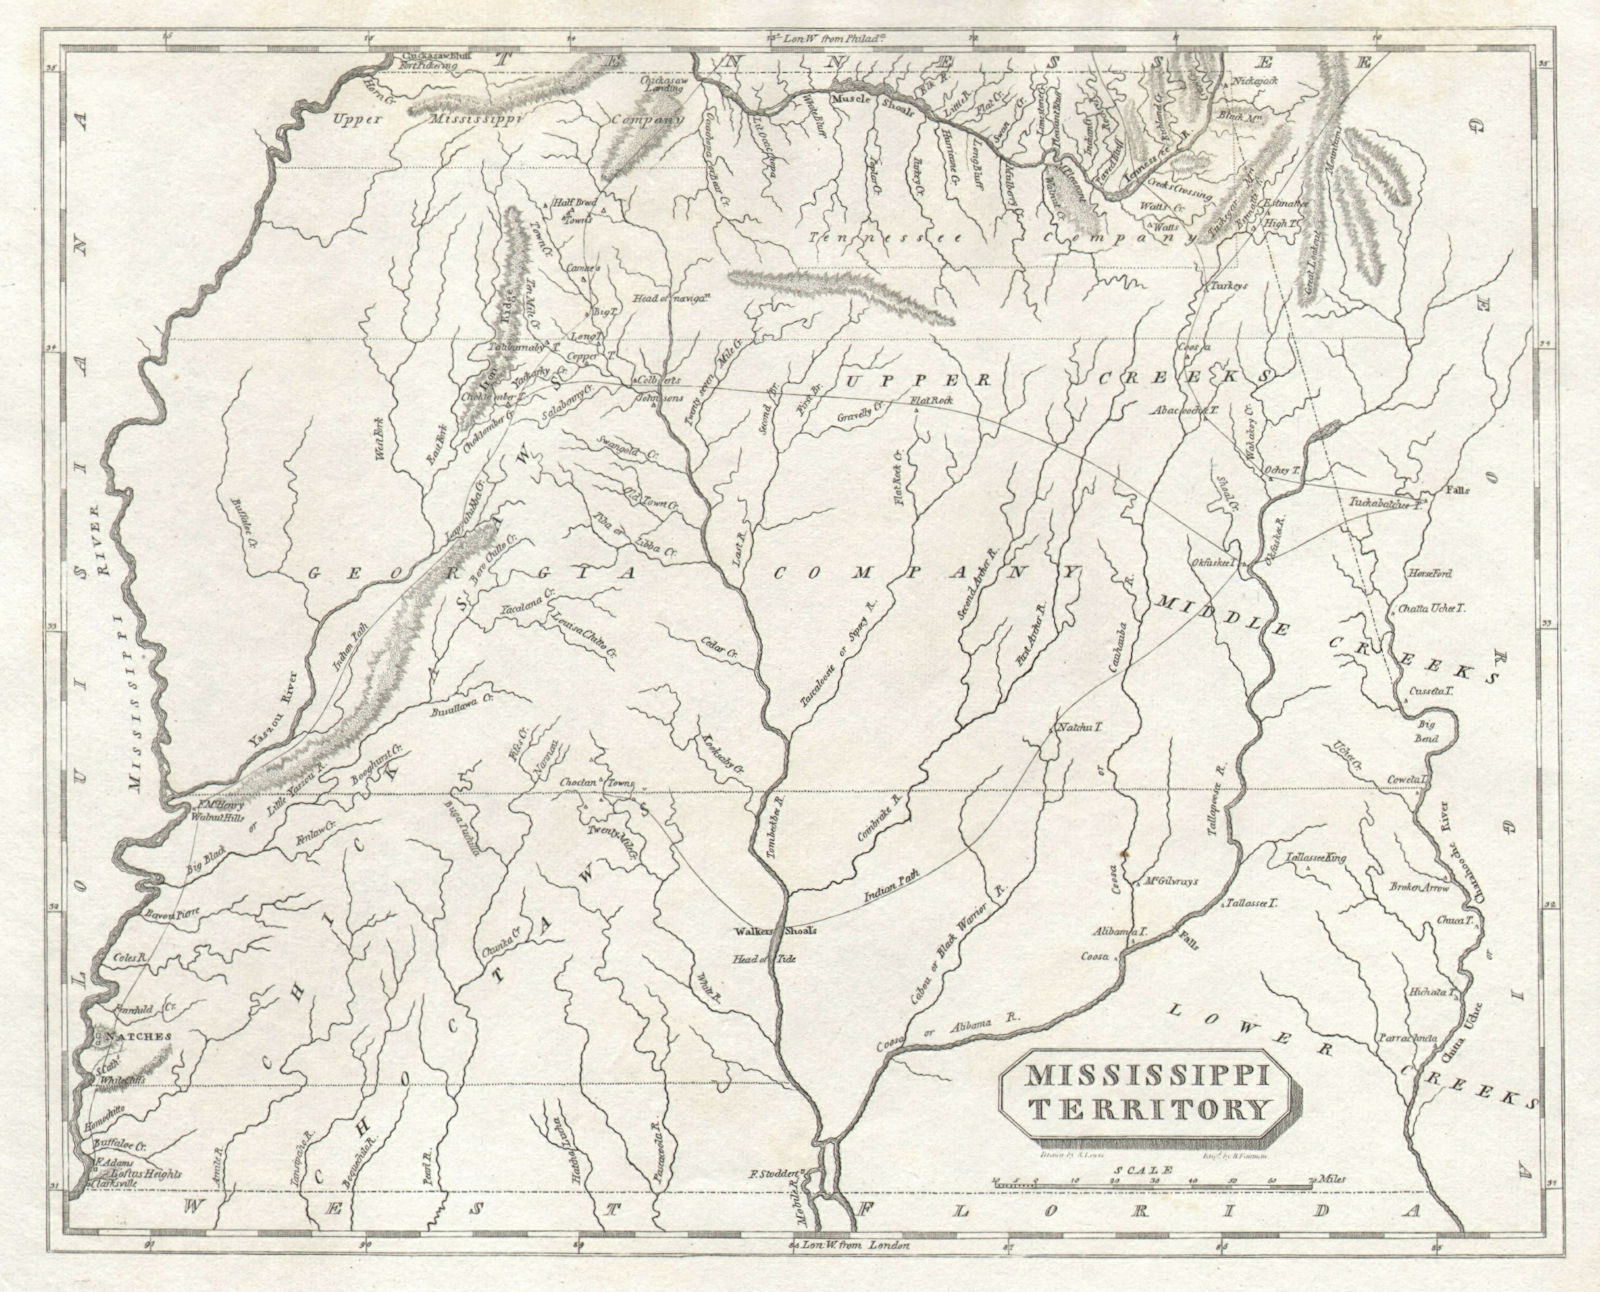 Mississippi Territory map by Arrowsmith & Lewis. Alabama. Tribal lands 1812